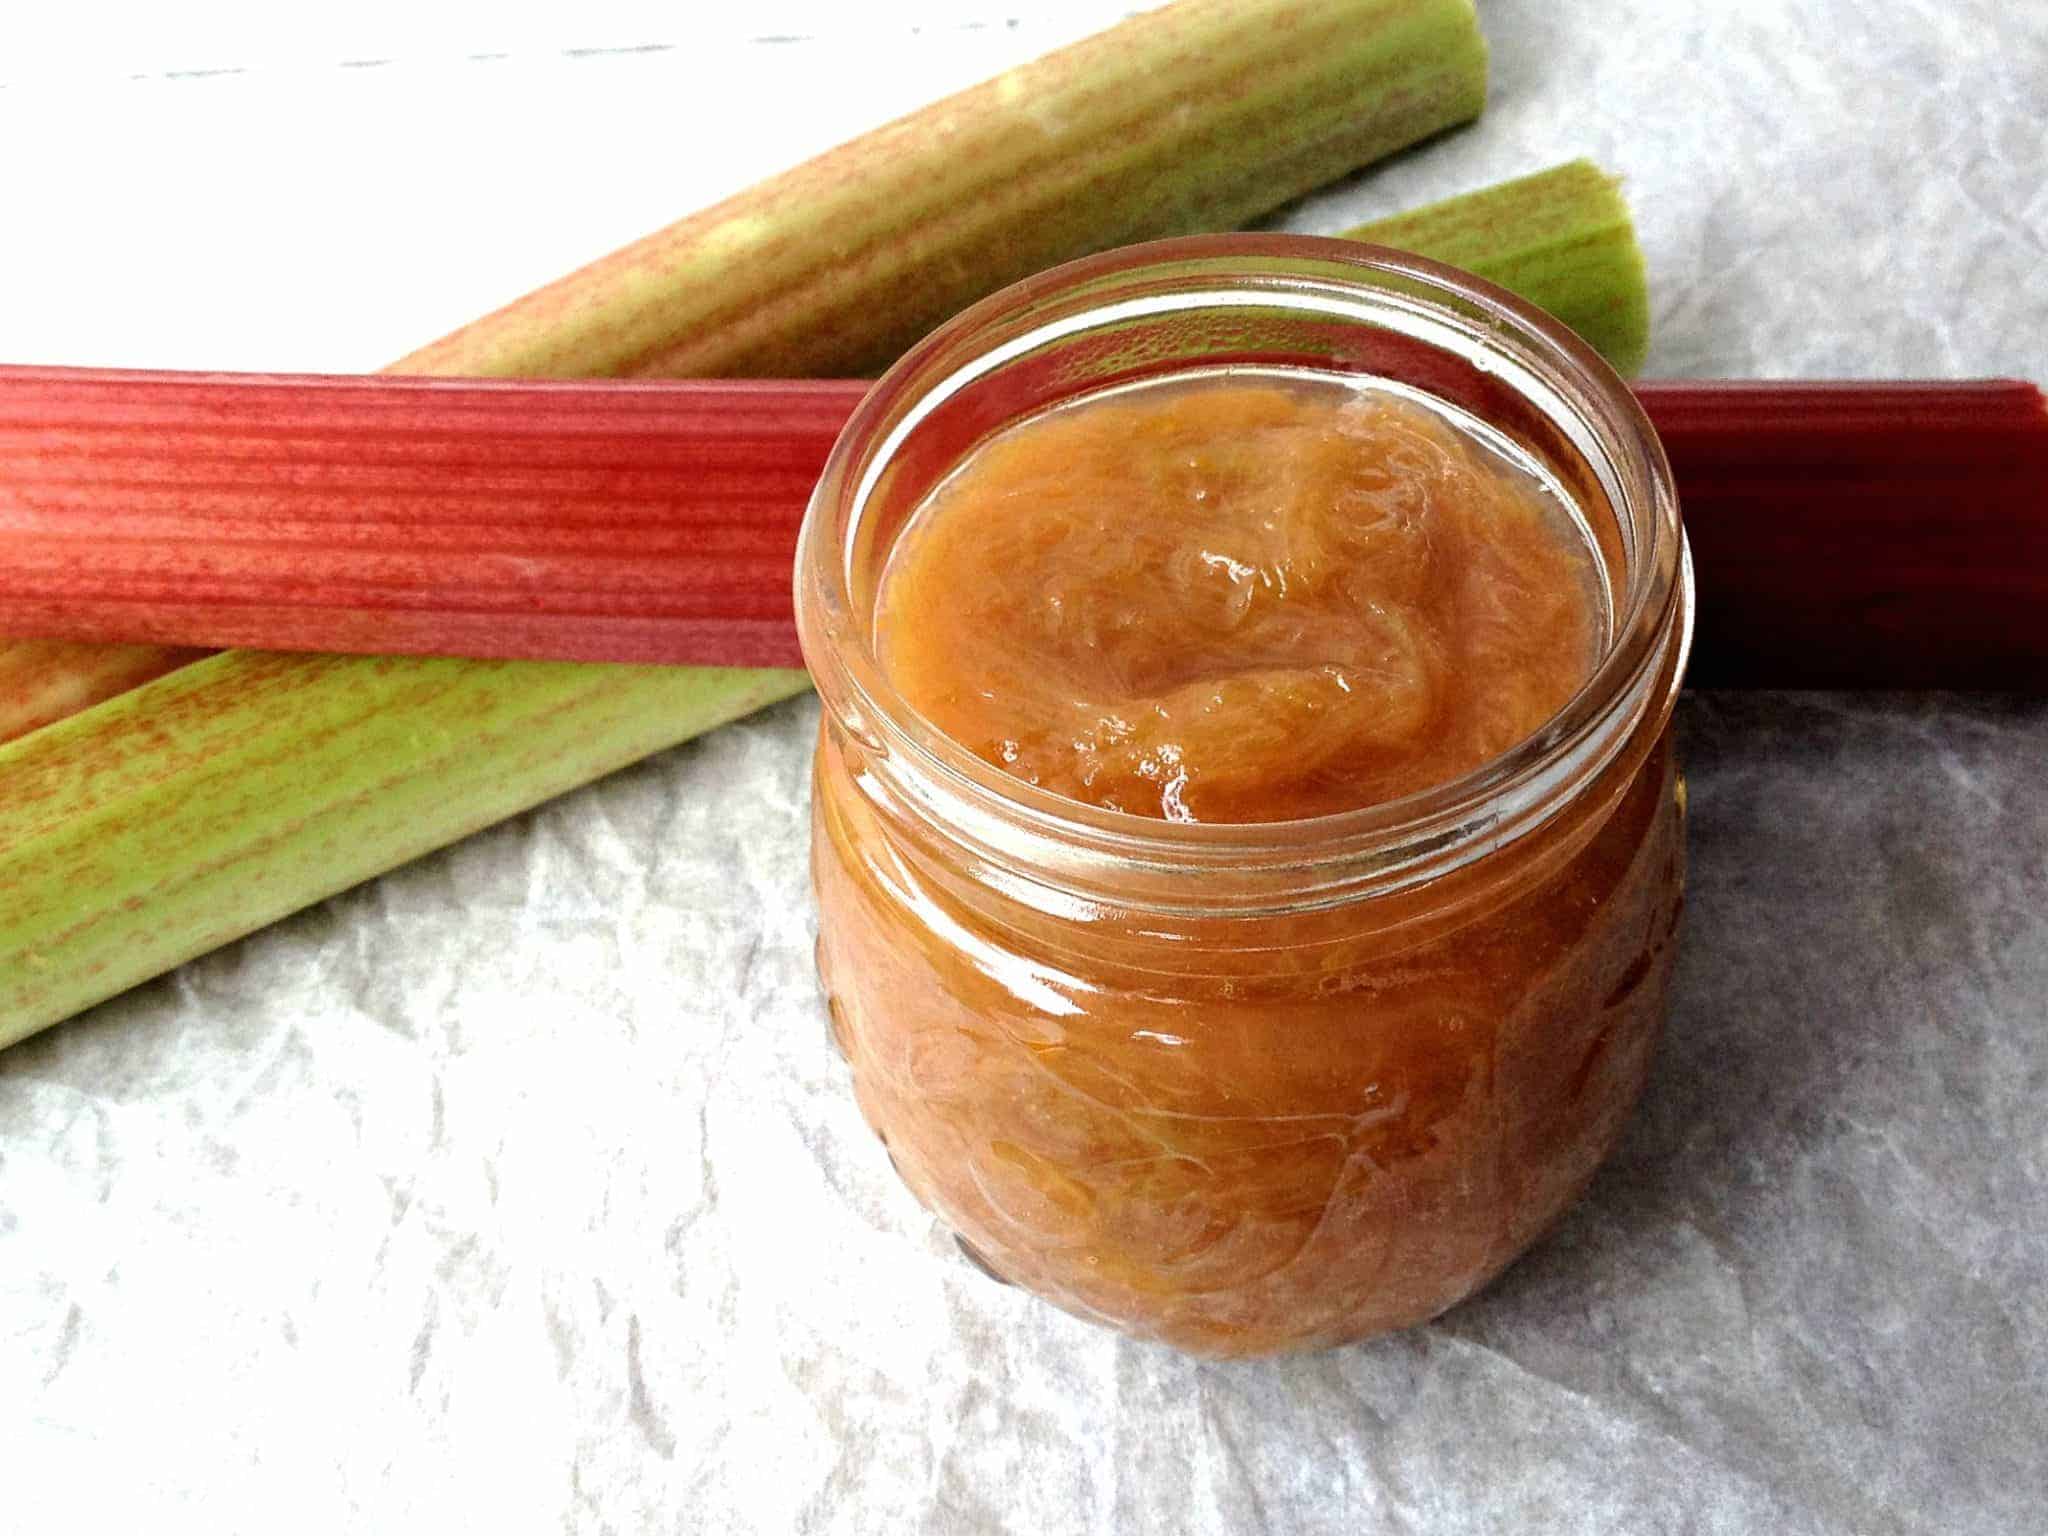 A jar full of cooked rhubarb with fresh stalks of rhubarb next to jar.